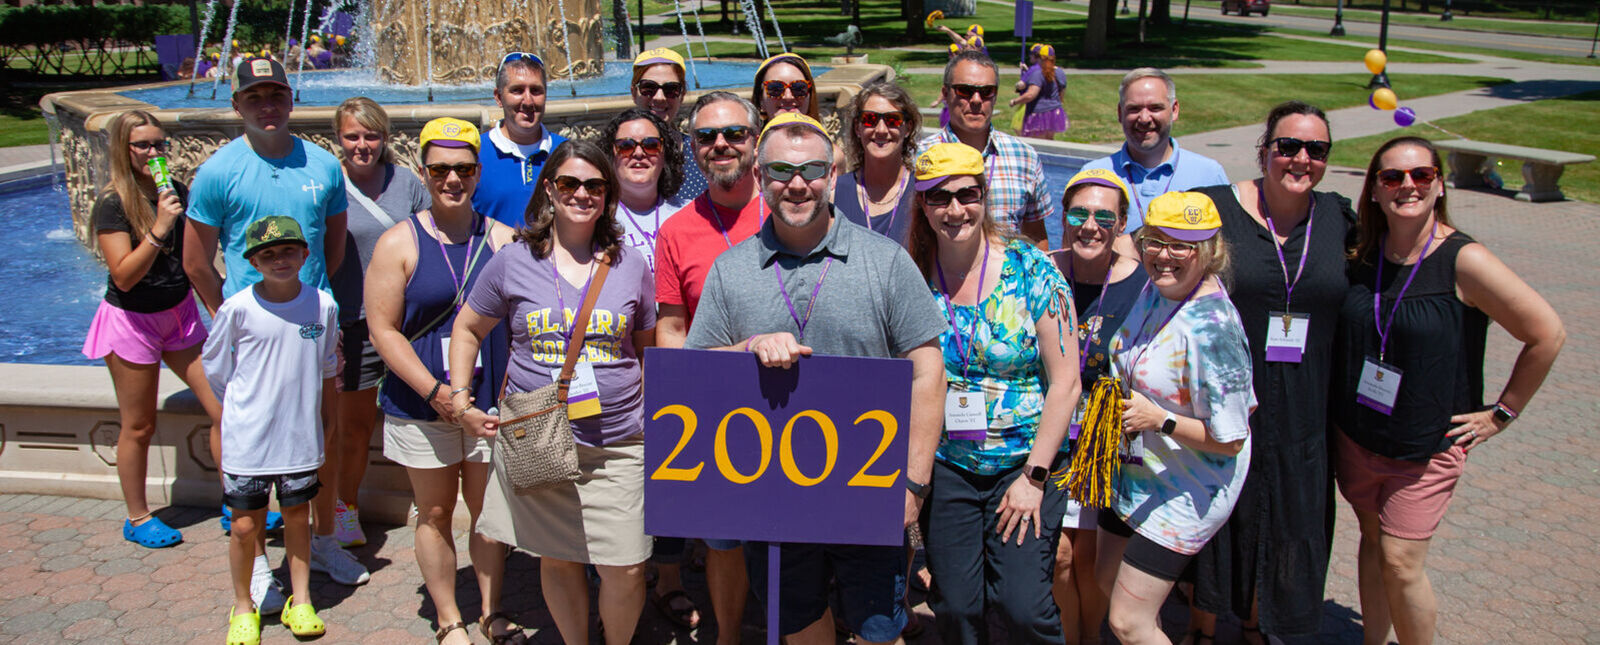 Class of 2022 members stand with a 2022 sign in front of the fountain during a reunion.